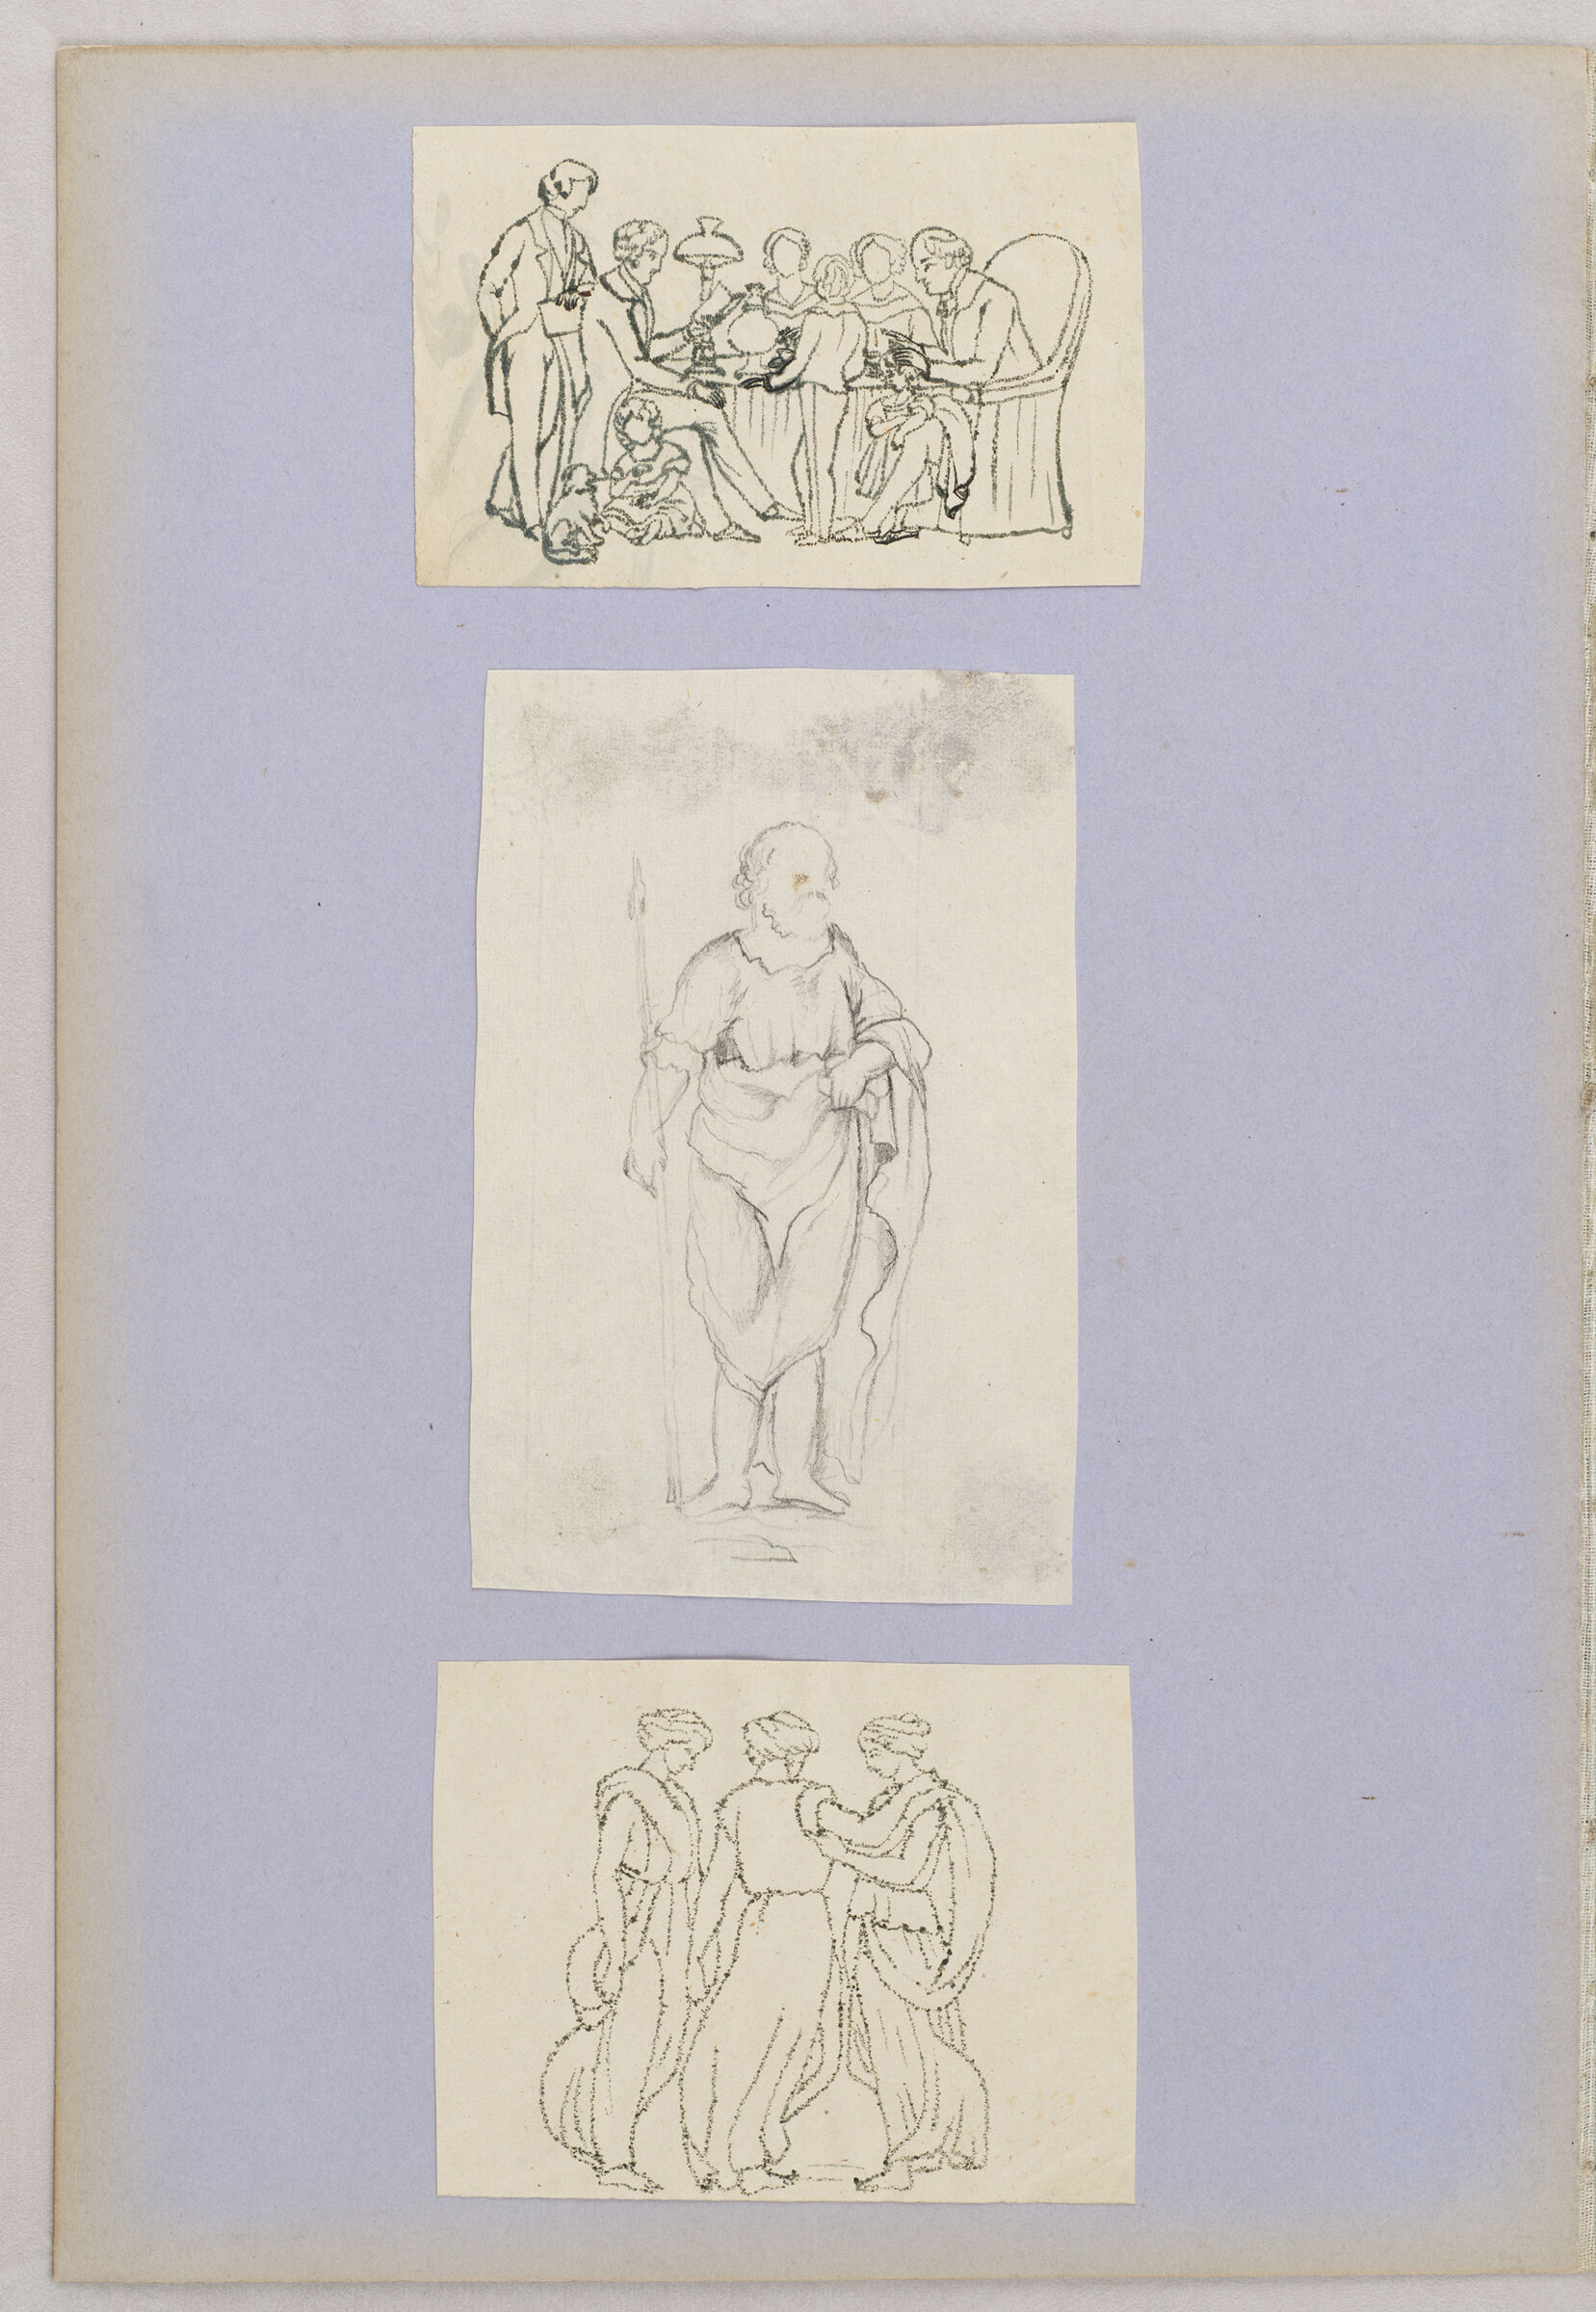 Folio 44 From An Album Of Drawings And Paintings: Three Sheets: European Family Gathered Around A Table; Bearded Man In Semi-Classical Garb; Three Graces (Recto); Blank Page (Verso)